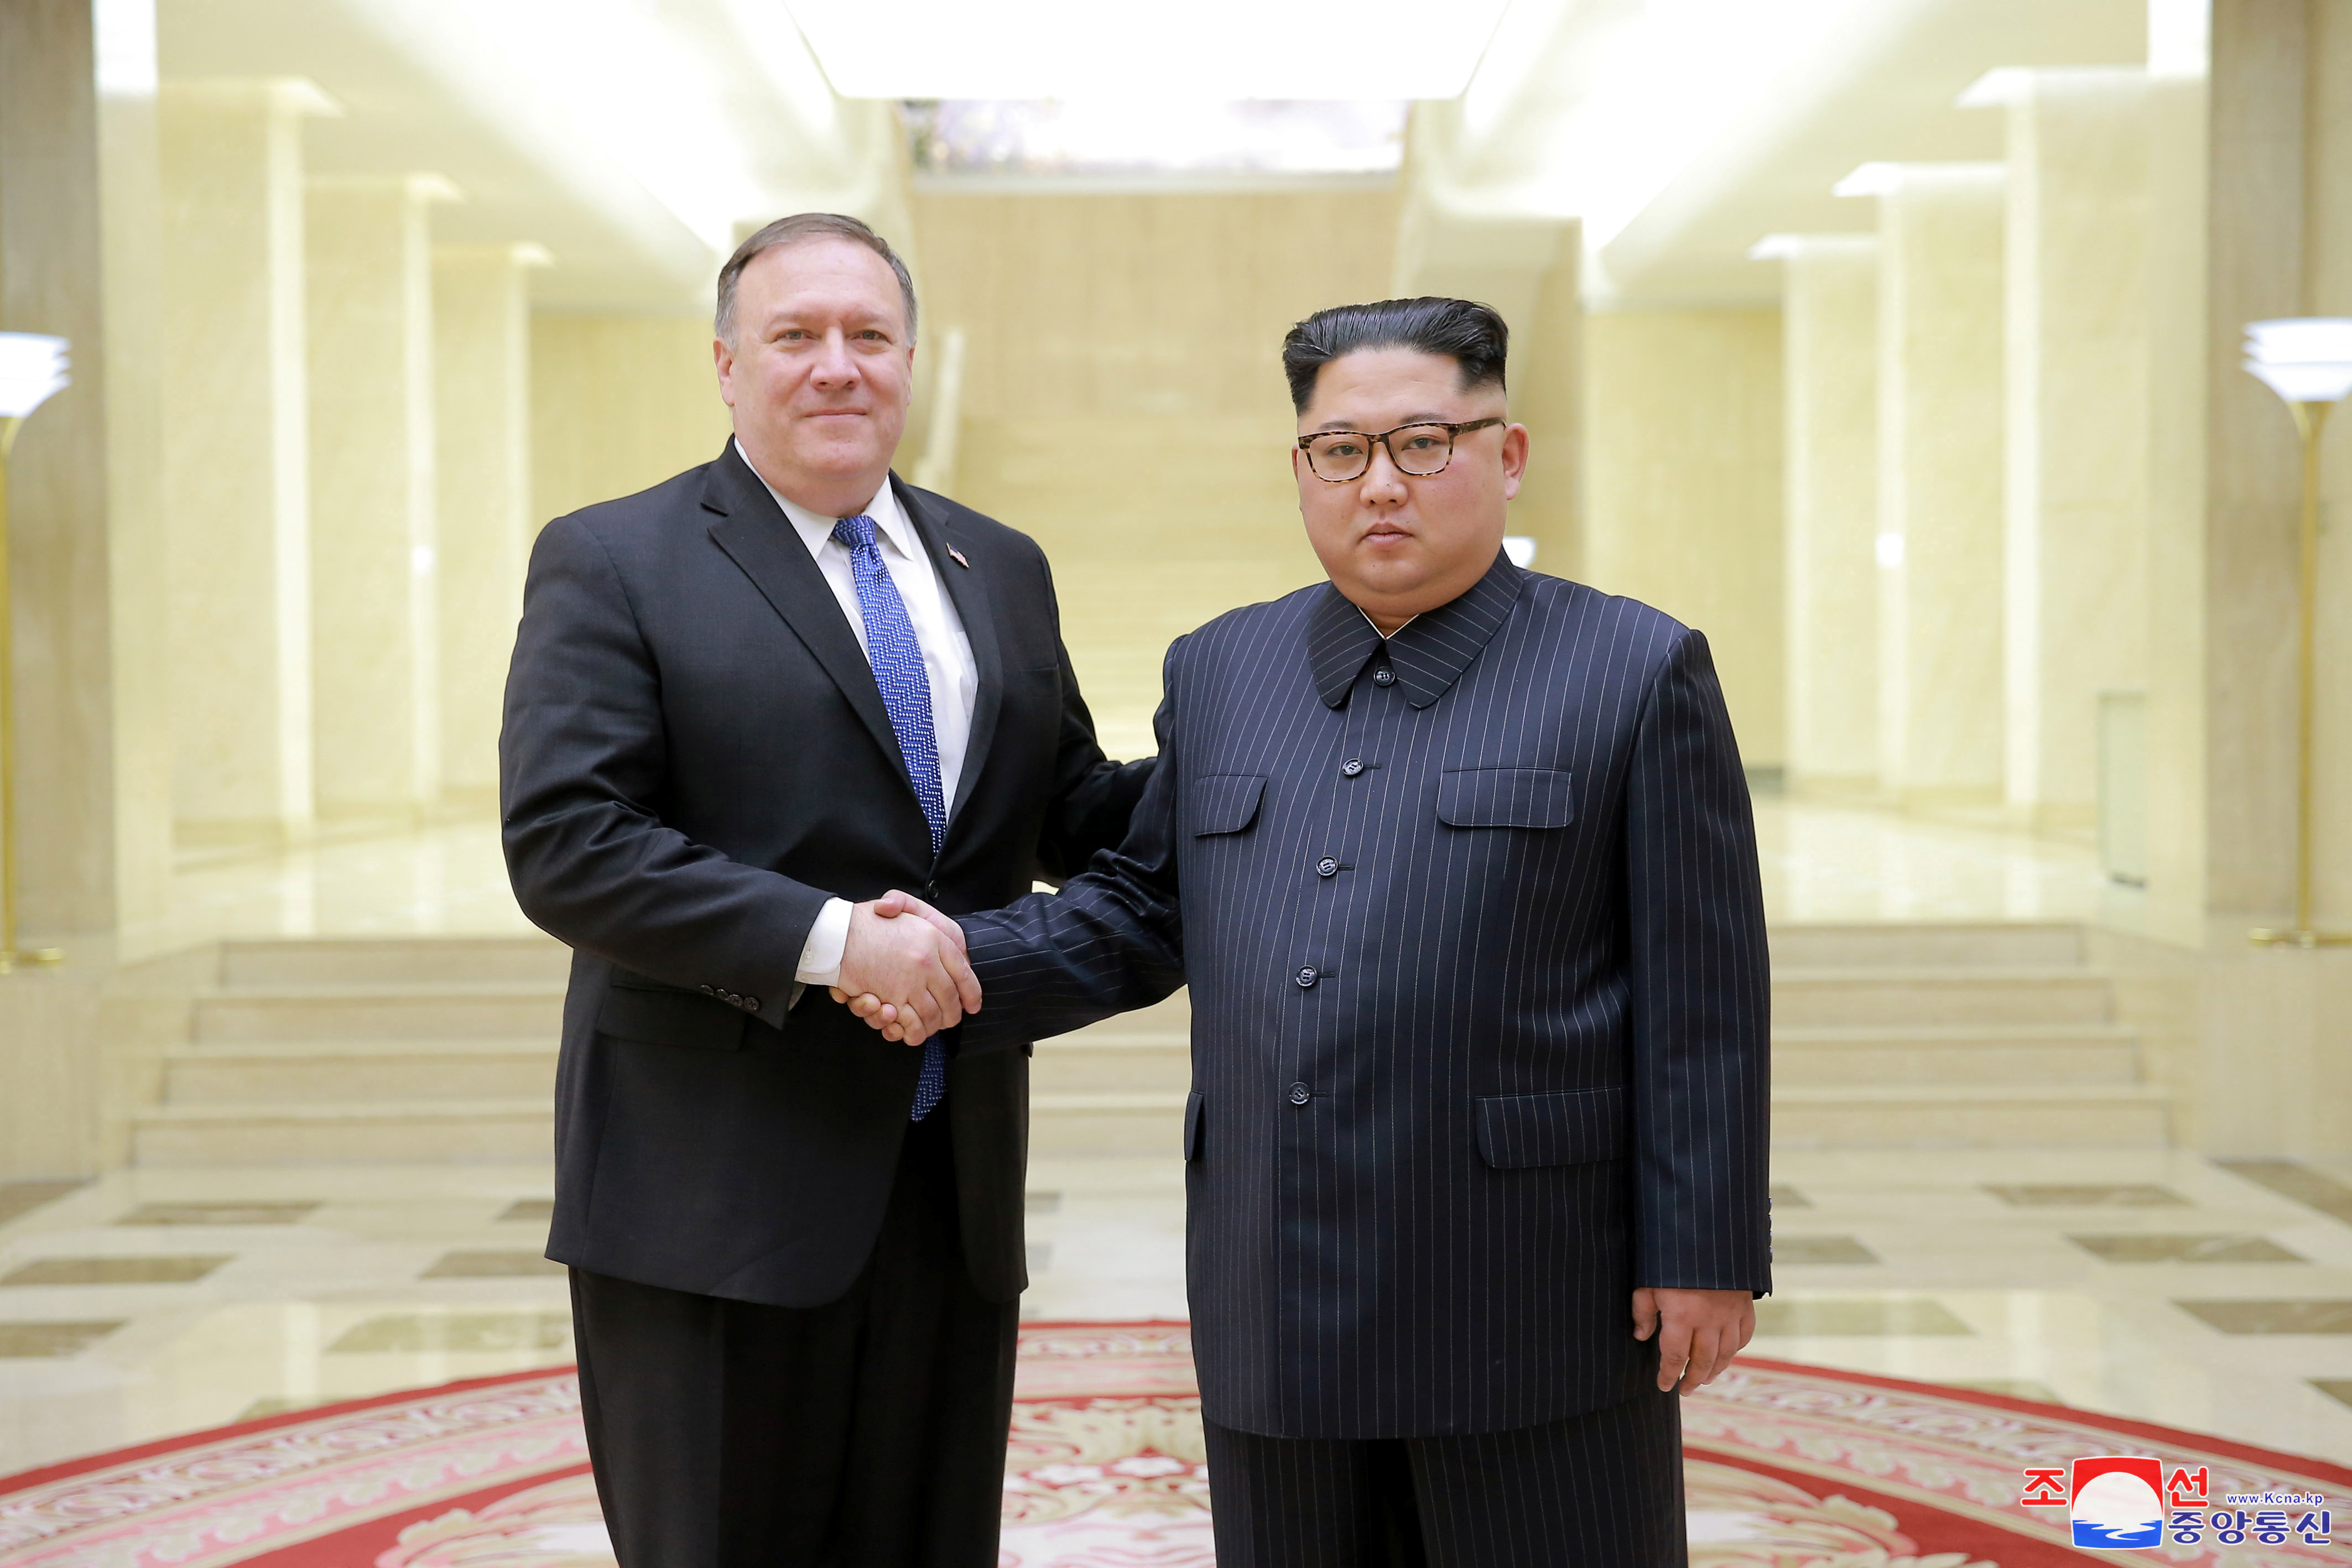 North Korean leader Kim Jong Un shakes hands with U.S. Secretary of State Mike Pompeo